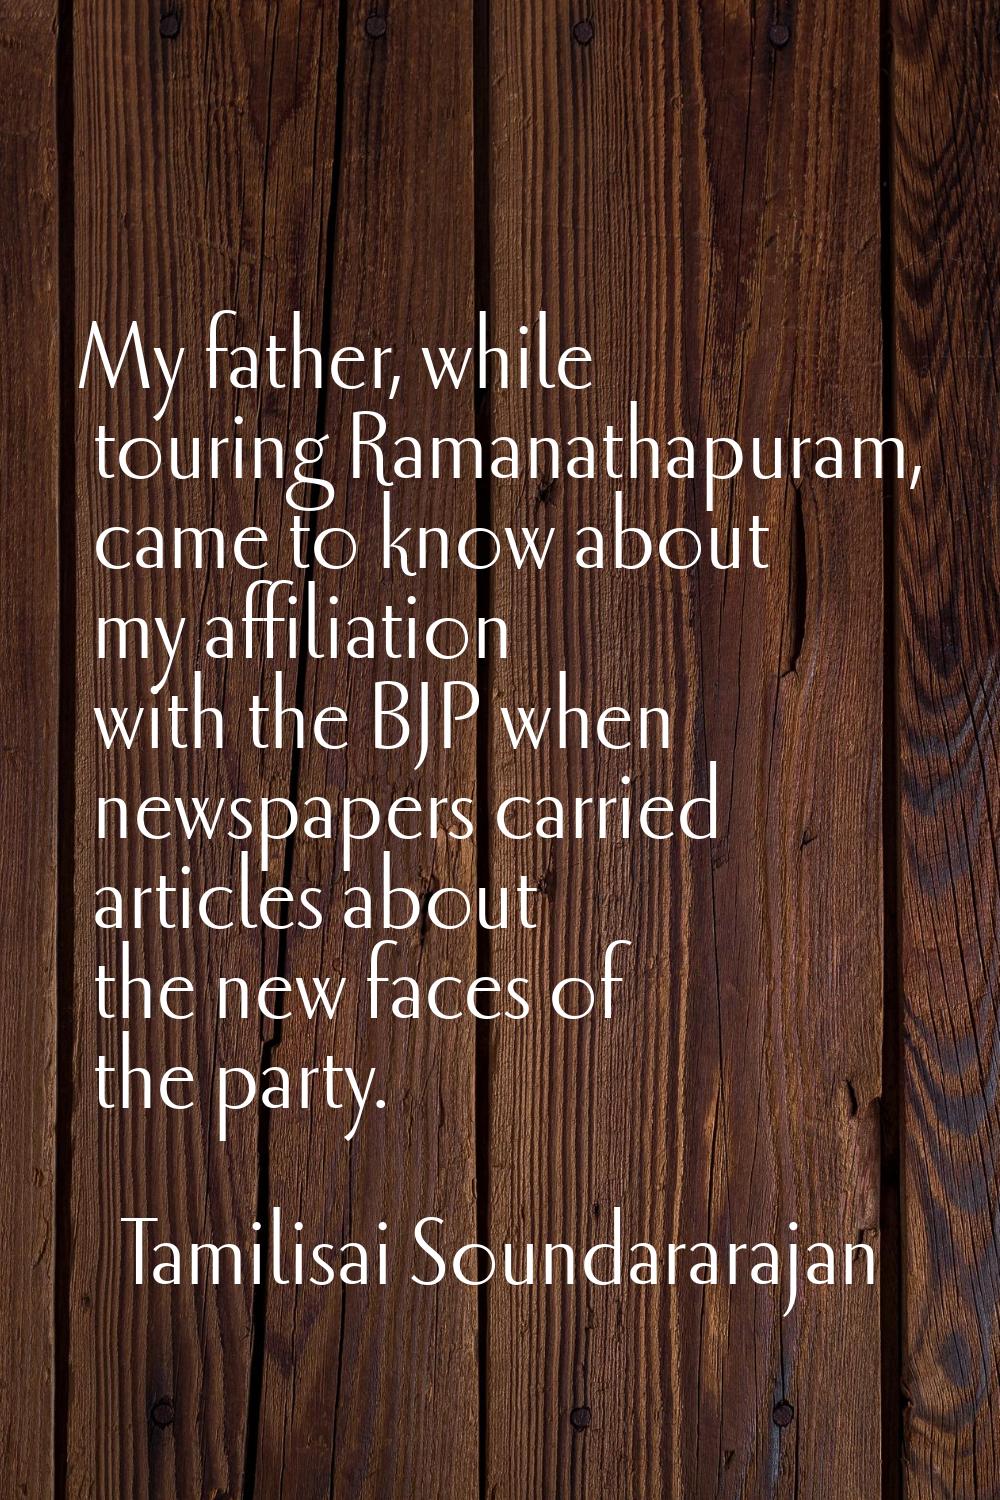 My father, while touring Ramanathapuram, came to know about my affiliation with the BJP when newspa